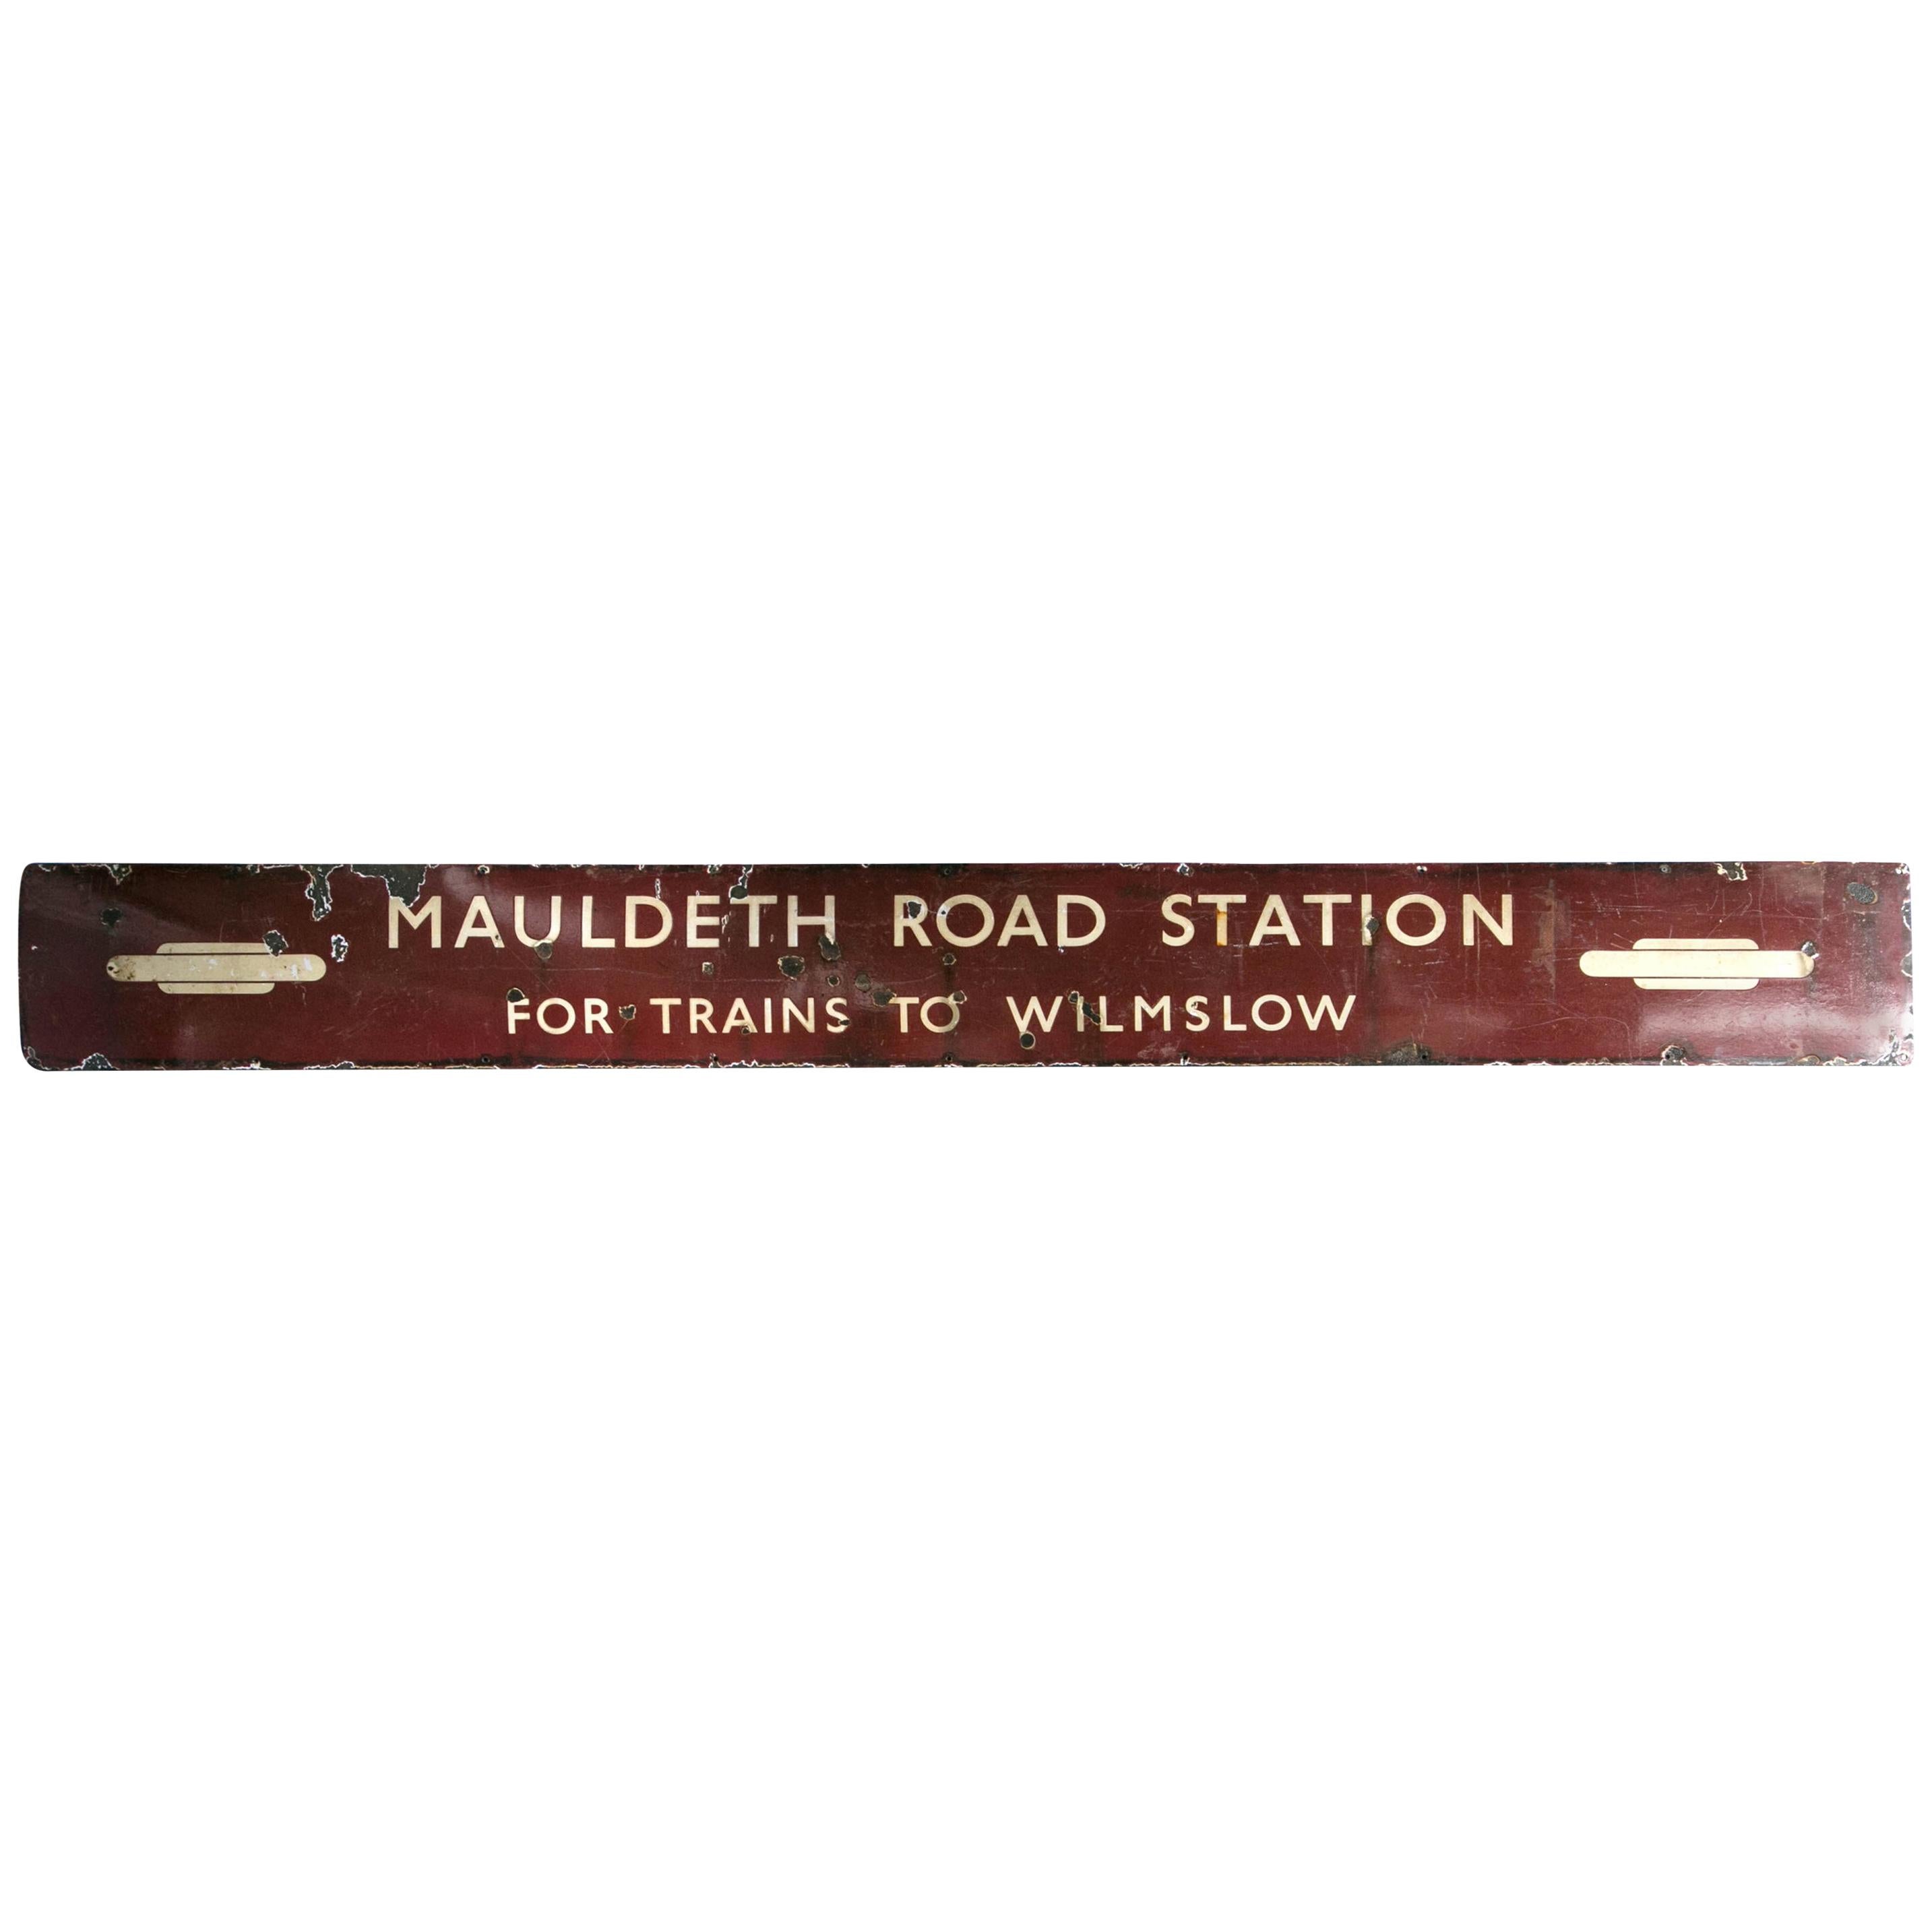 Antique English Railway Sign For Sale